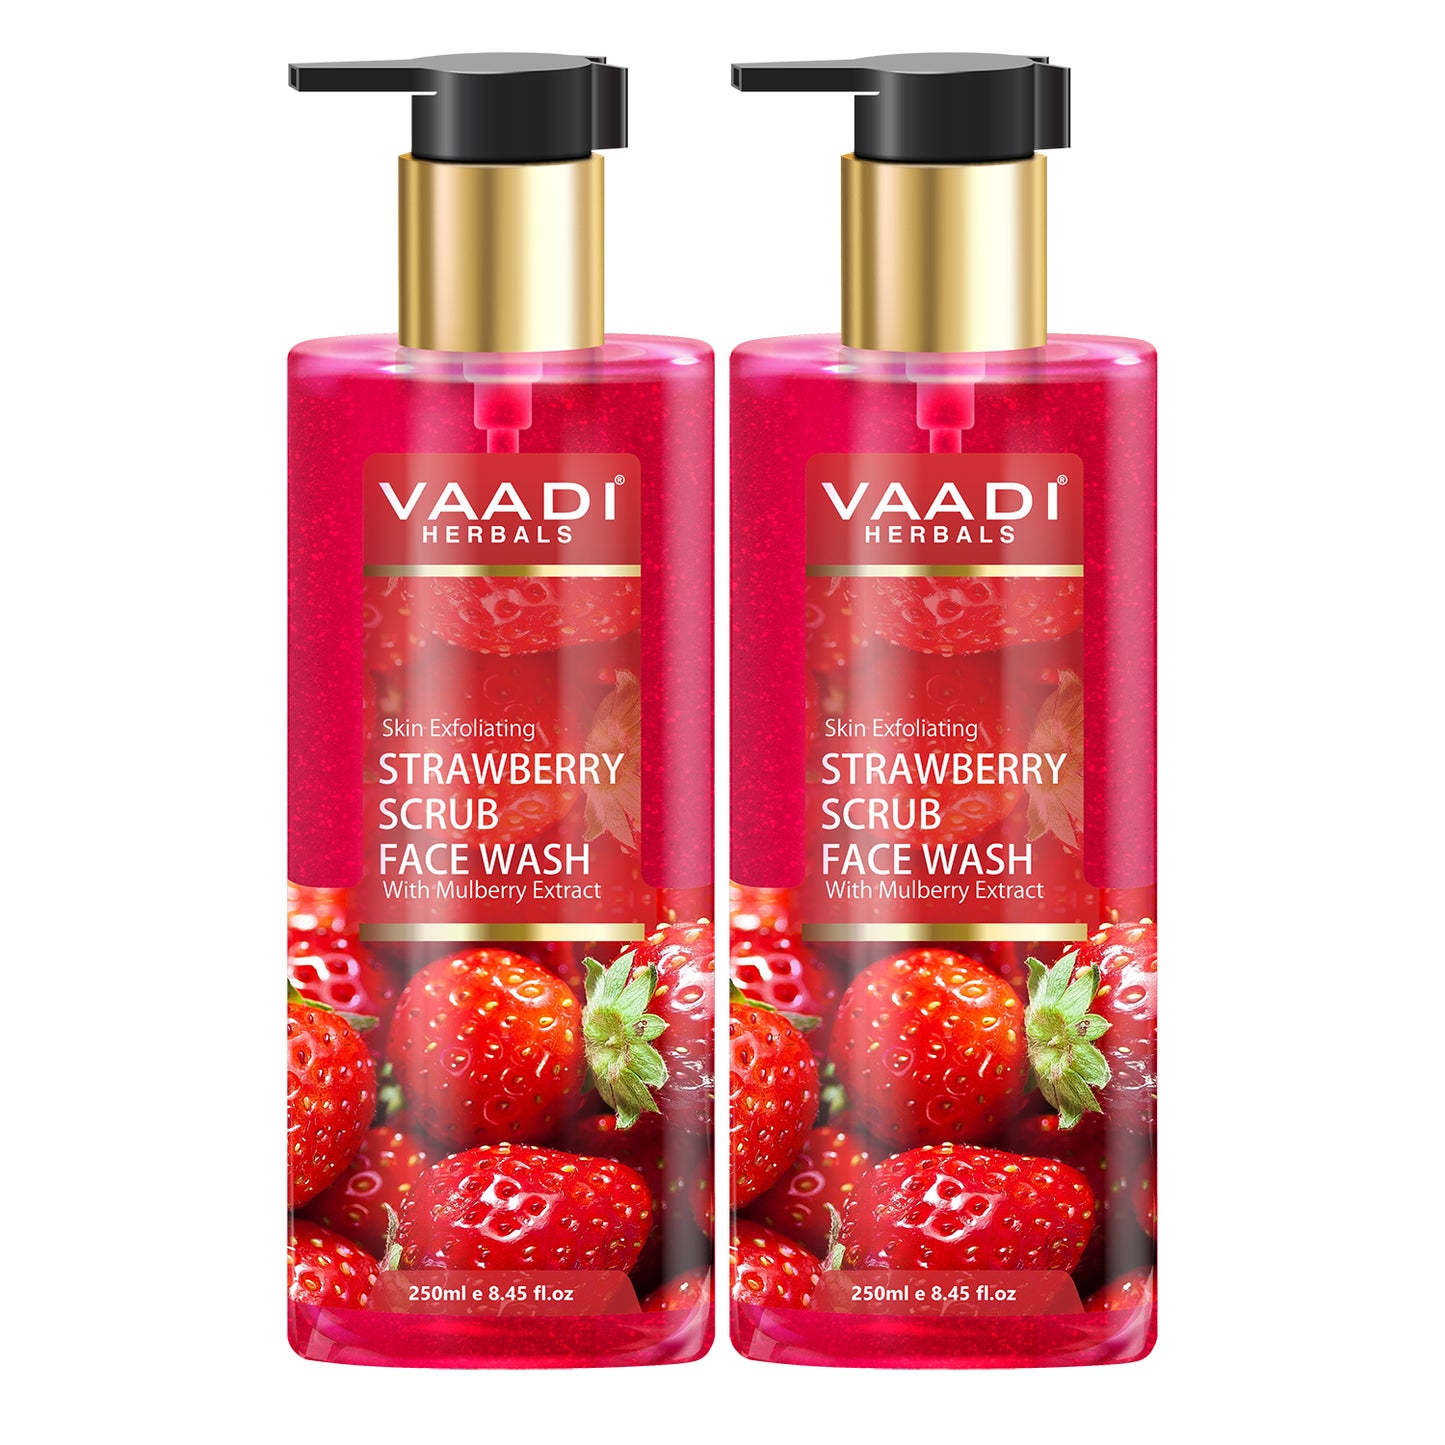 Skin Exfoliating Organic Strawberry Scrub Face Wash with Mulberry Extract- Removes Dead Skin - Deeply Nourishes Skin ( 2 x 250 ml/8.45 fl oz)